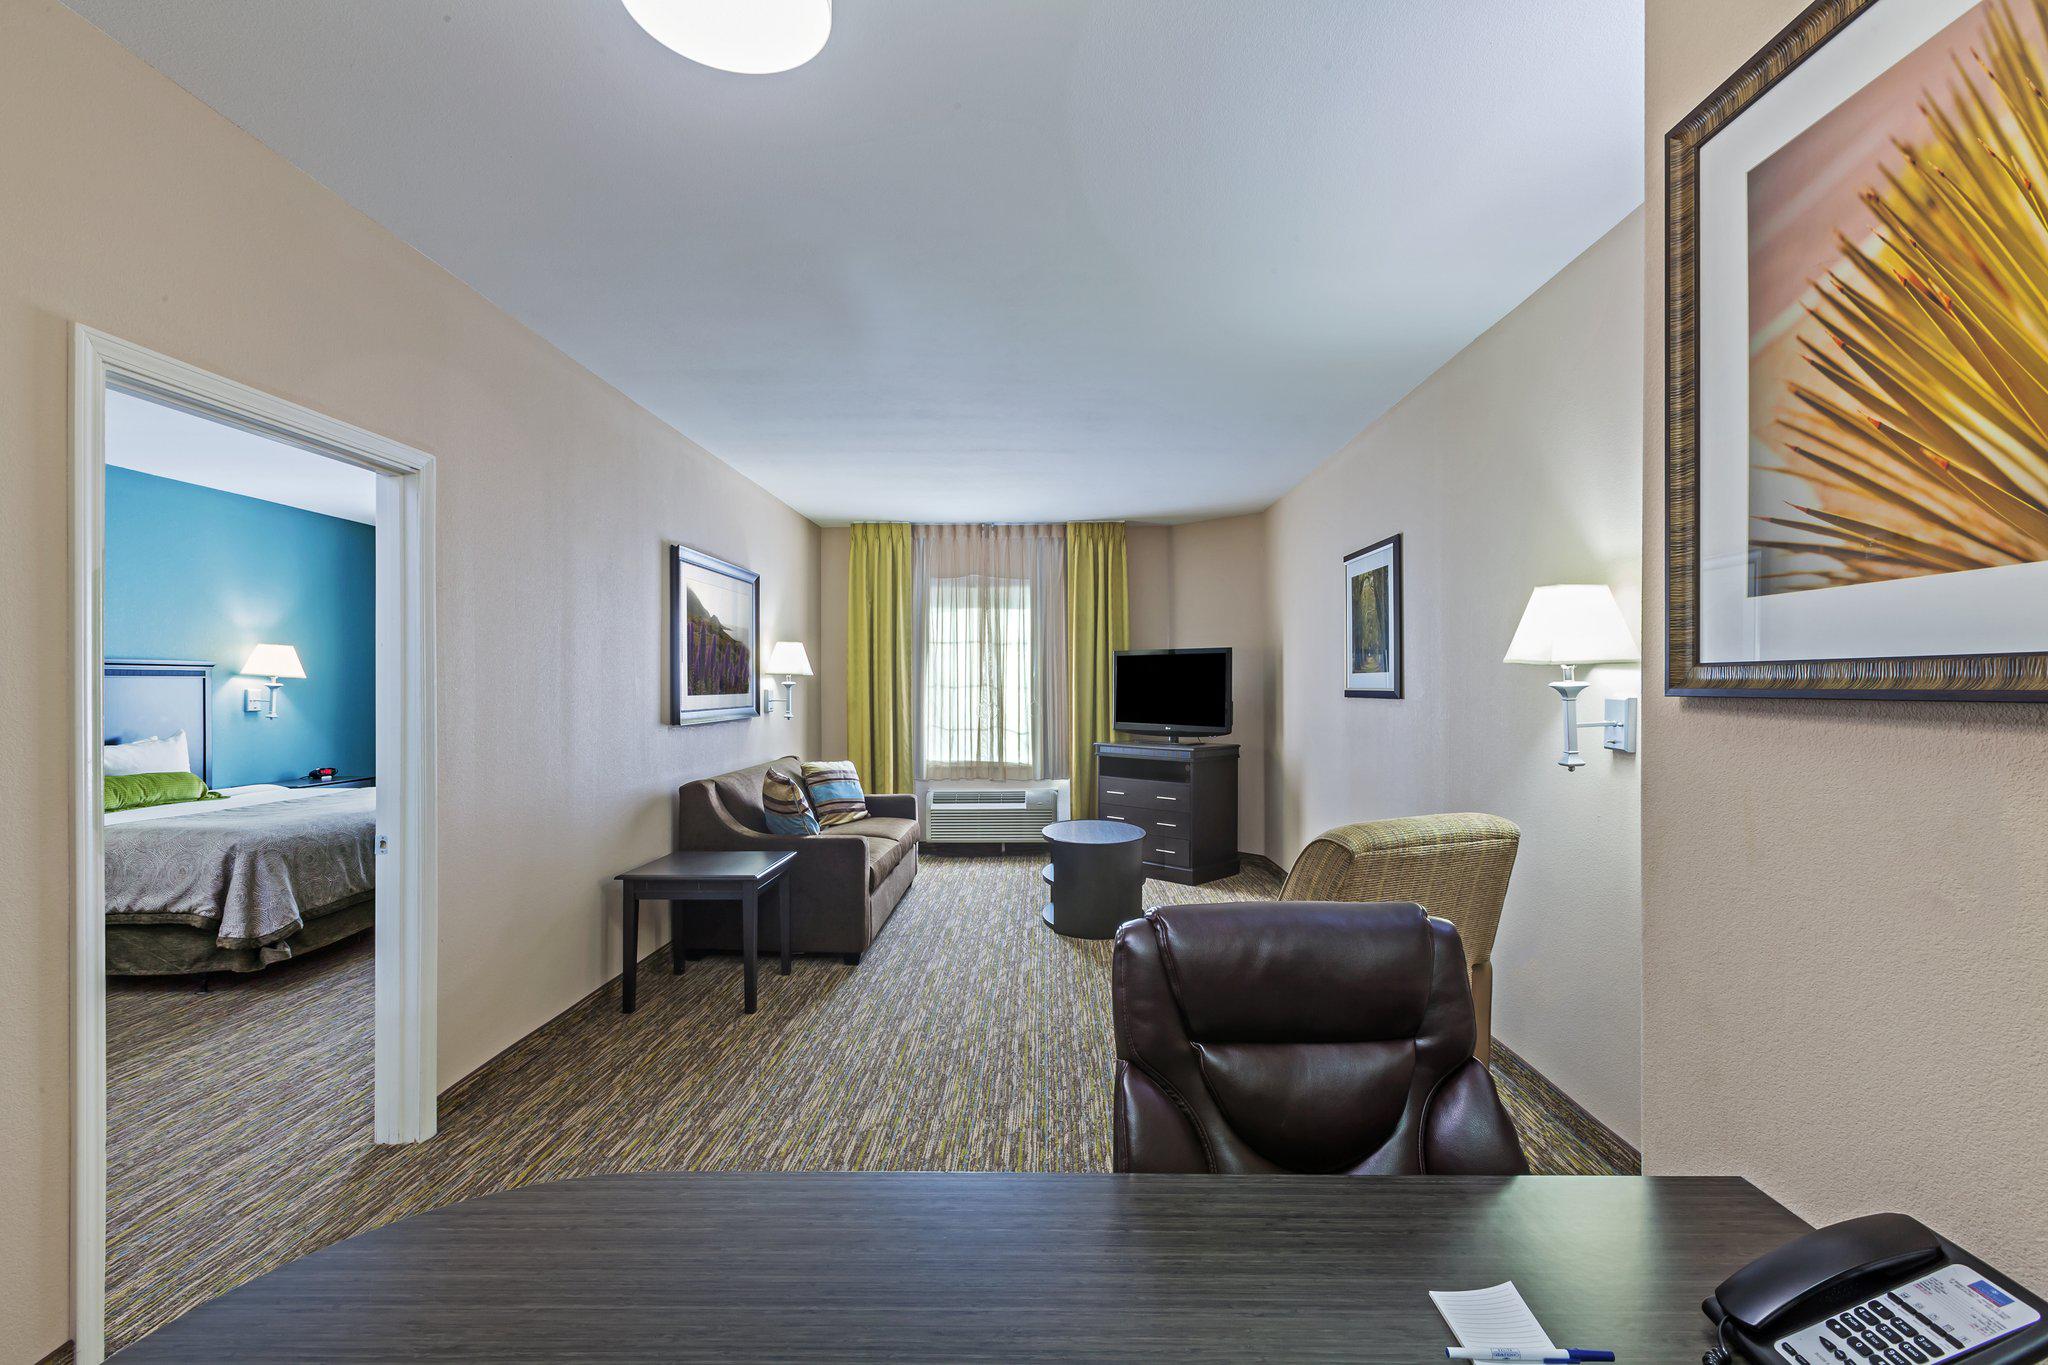 Candlewood Suites Amarillo-Western Crossing Photo